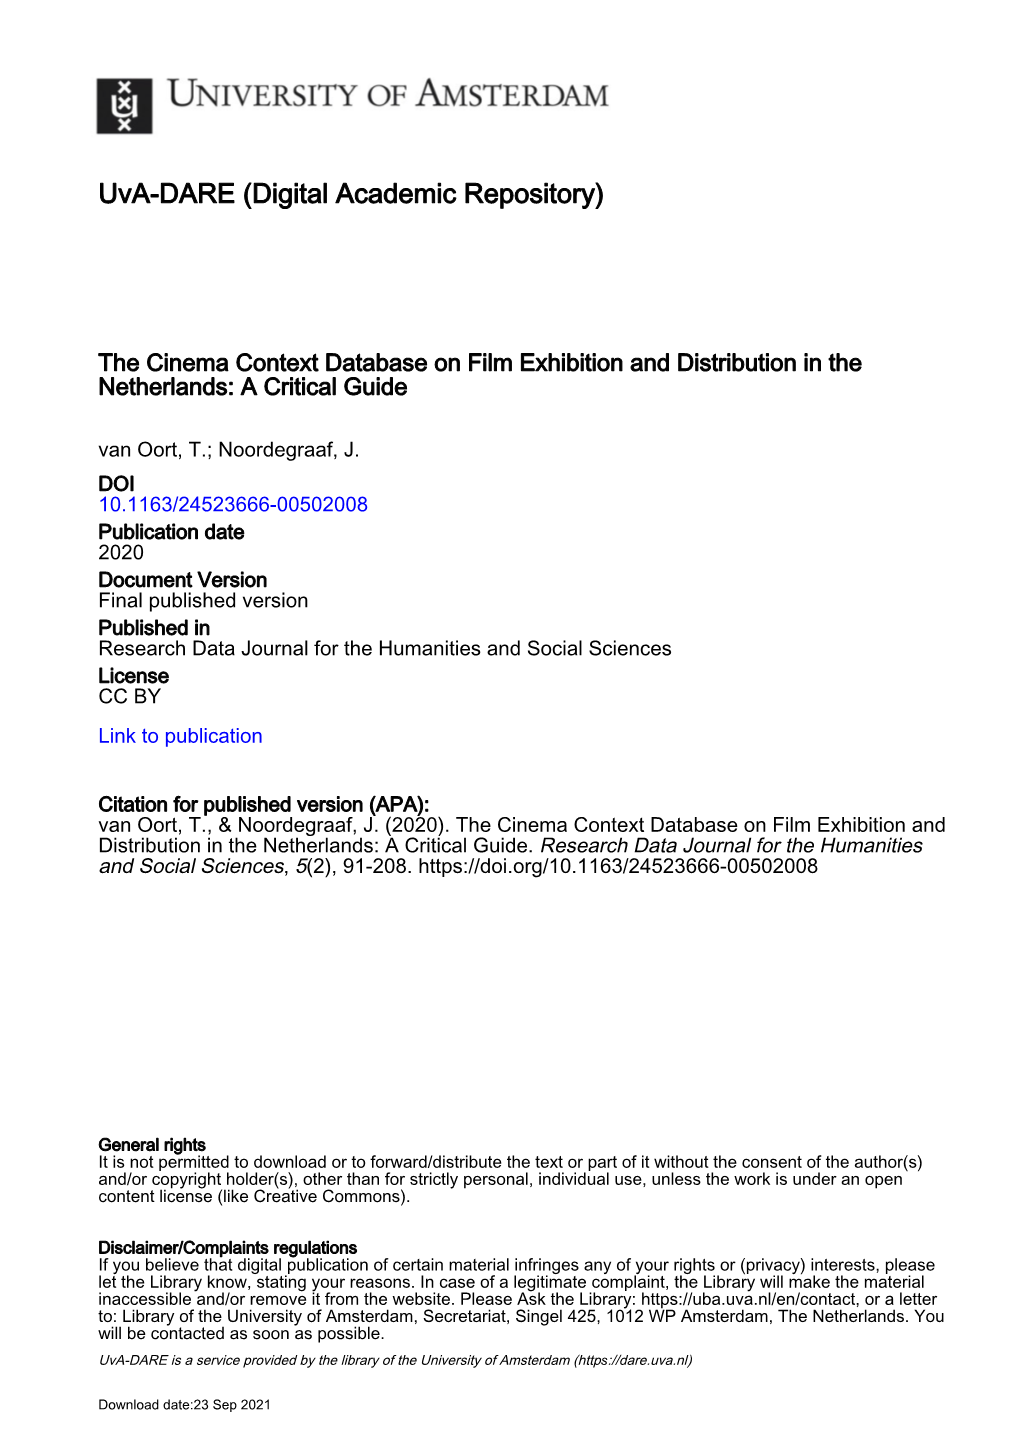 The Cinema Context Database on Film Exhibition and Distribution in the Netherlands: a Critical Guide Van Oort, T.; Noordegraaf, J